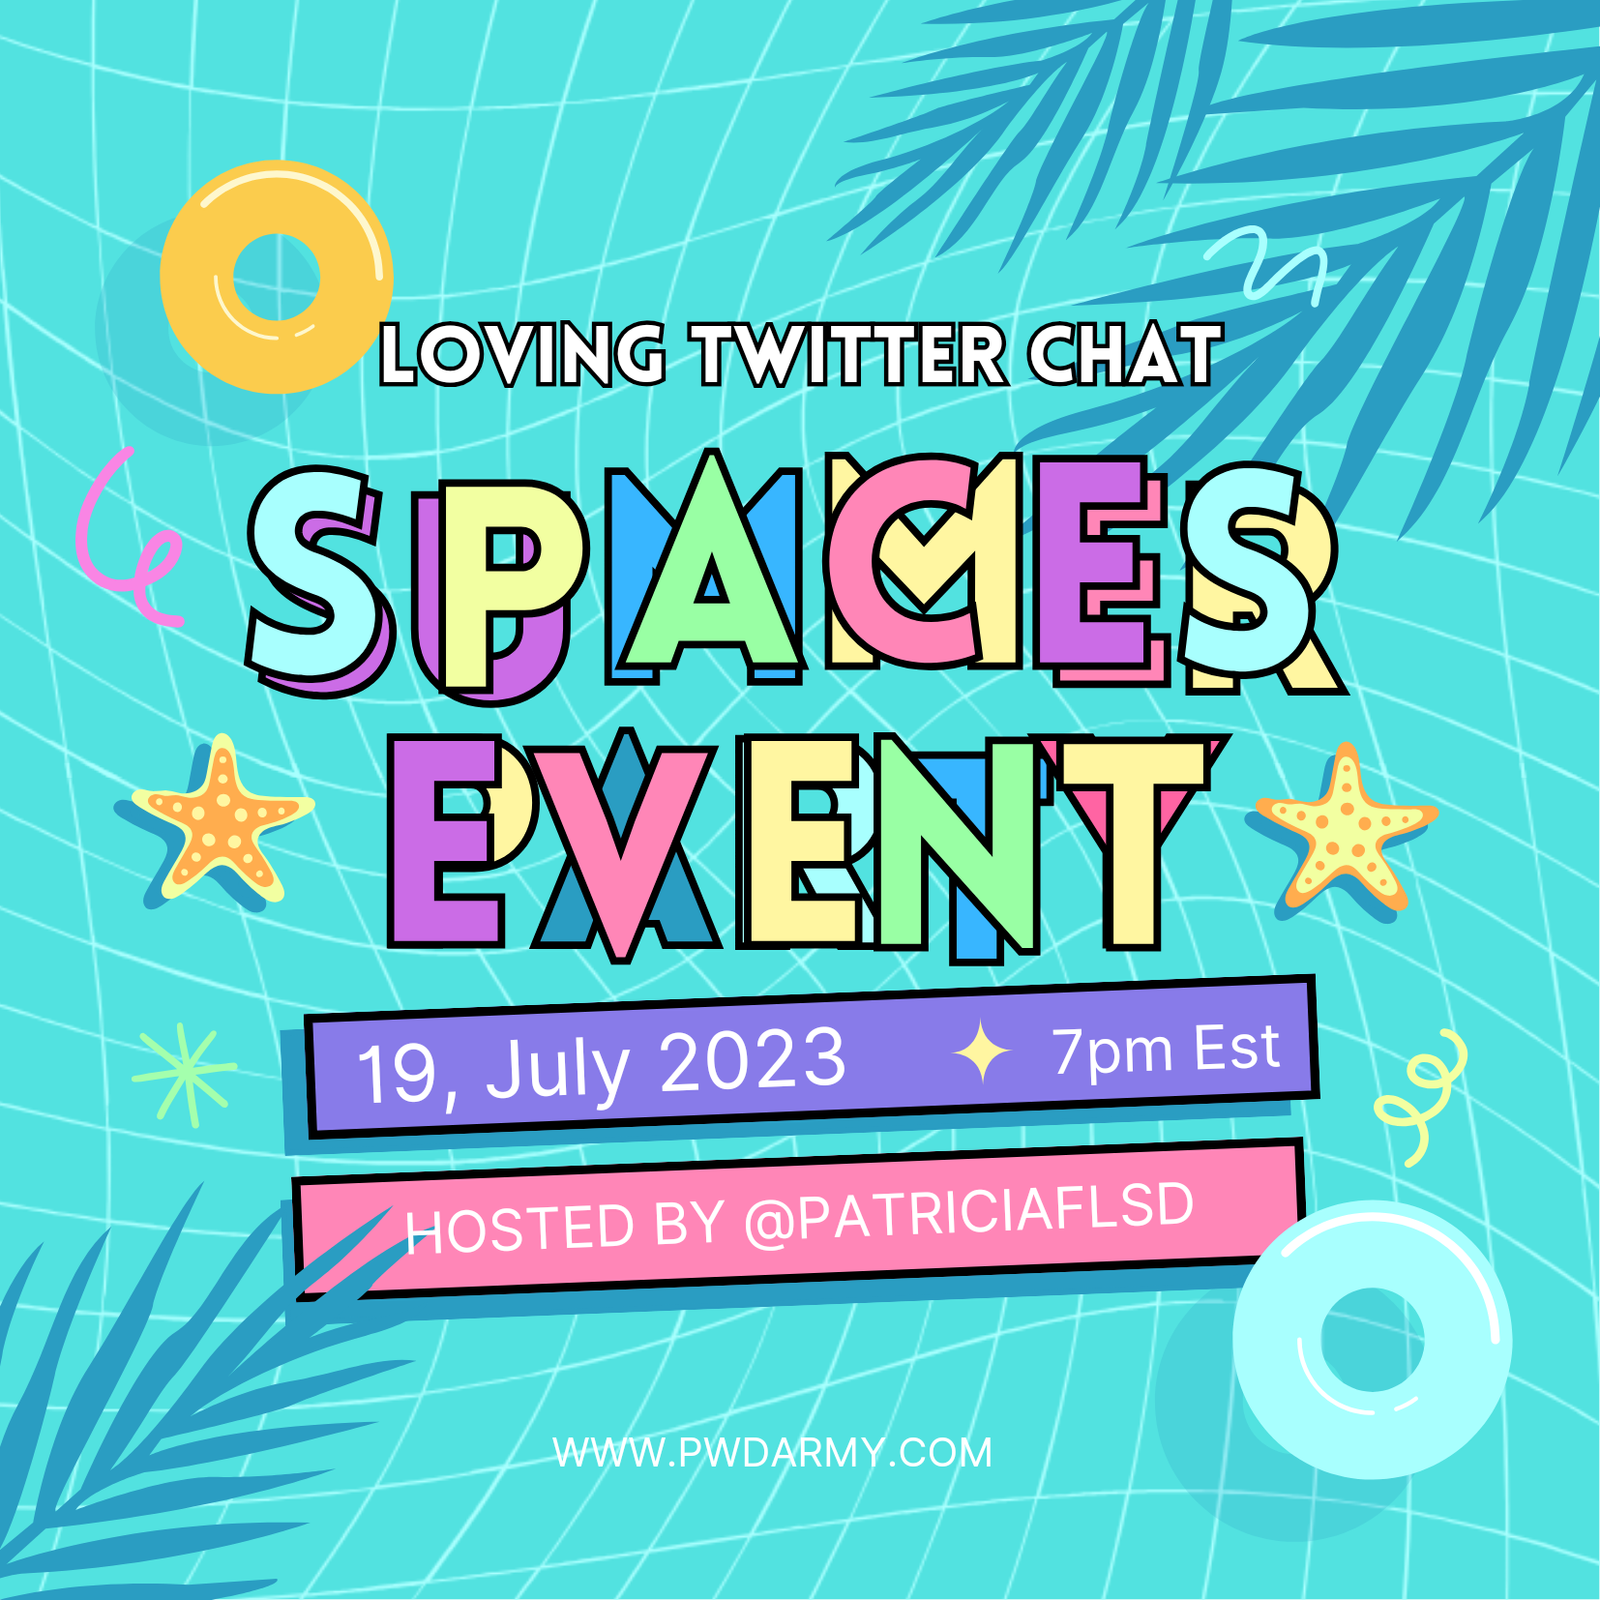 Loving Twitter Spaces Event 19, July, 2023 Hosted by PatricaFLD